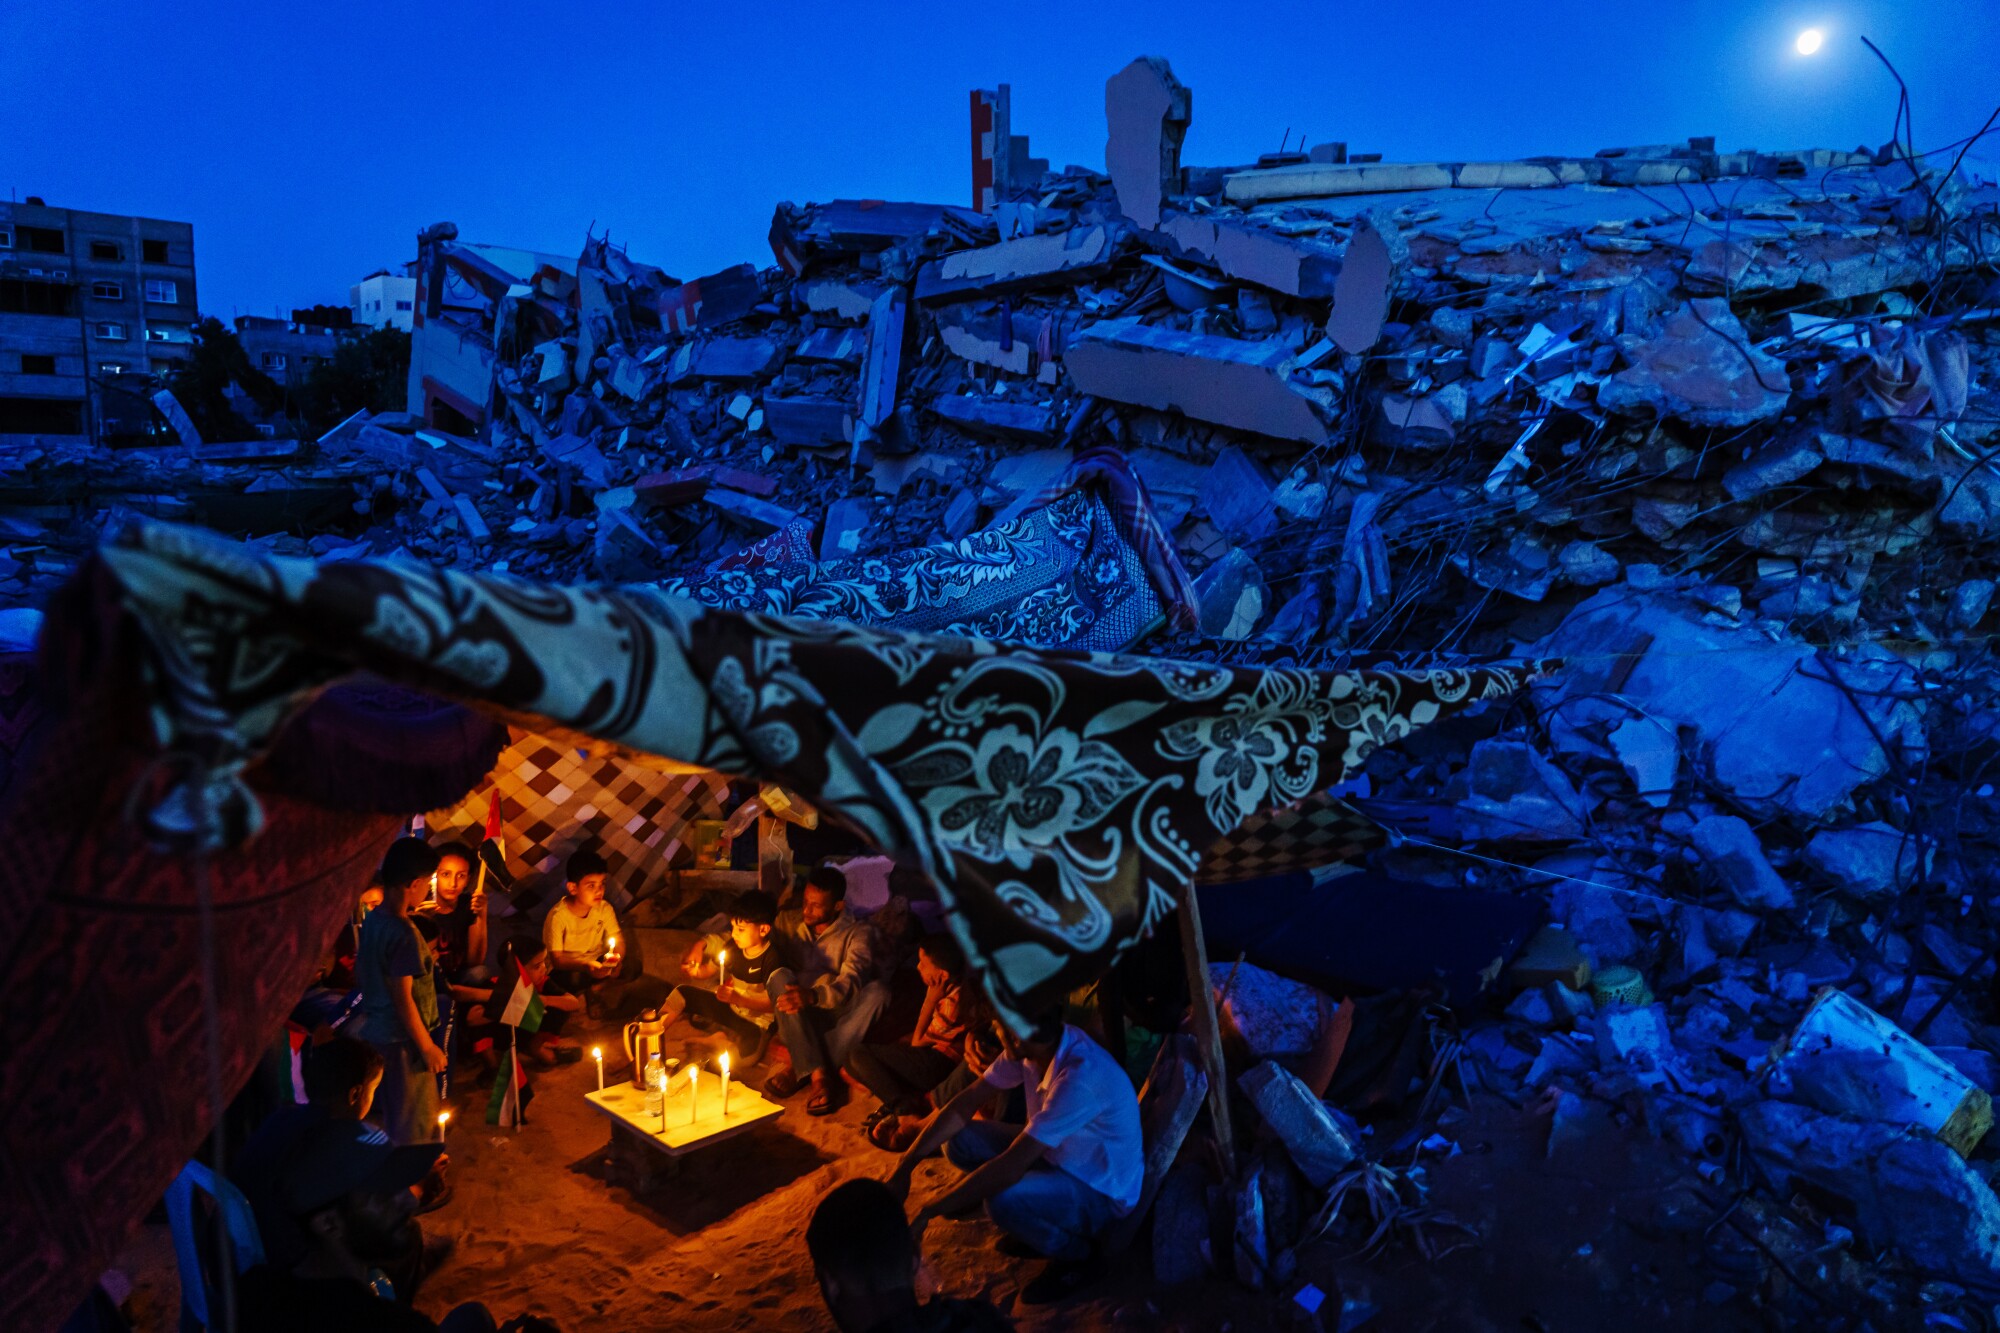 Palestinian families huddle amid the rubble to attend a candlelight vigil in Gaza City.